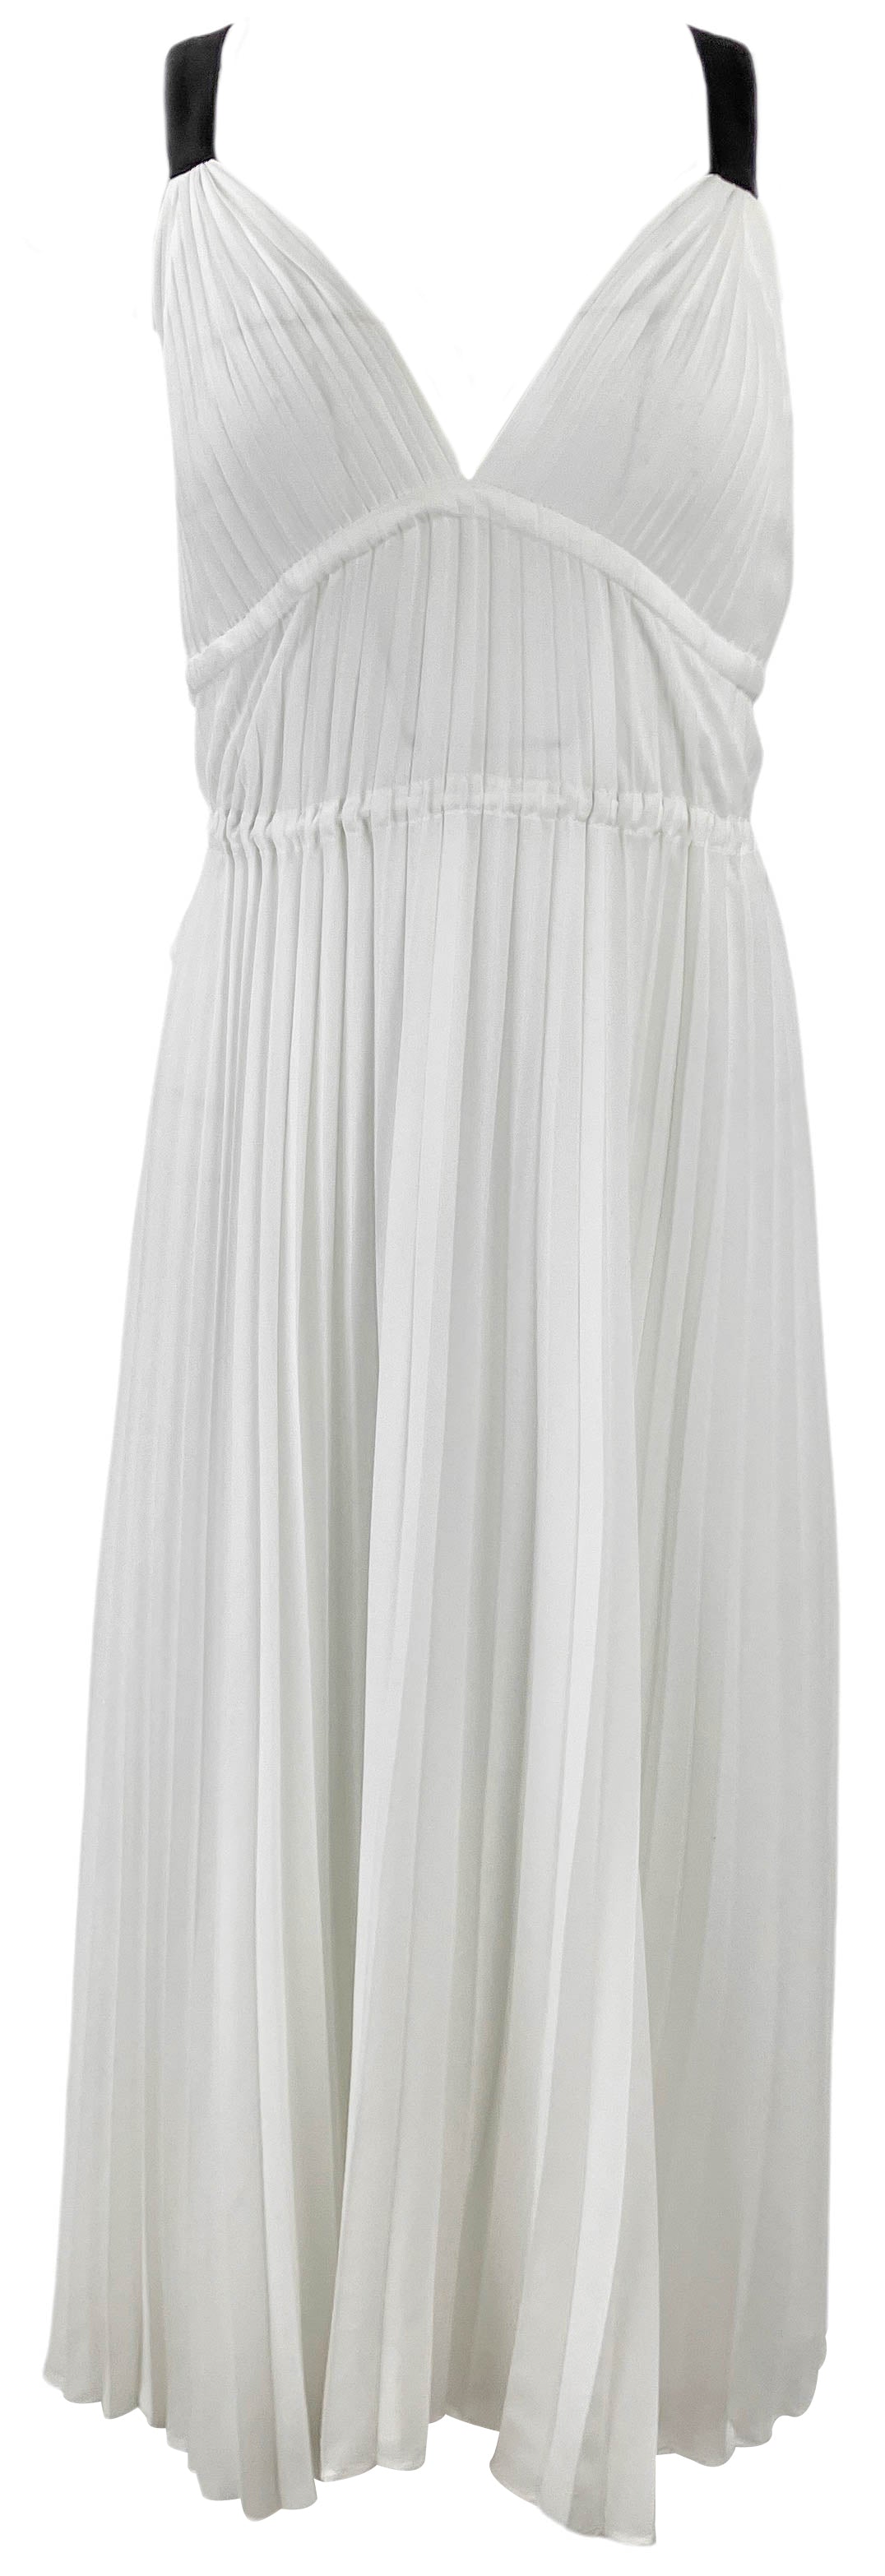 Proenza Schouler White Label Broomstick Pleated Tank Dress in White - Discounts on Proenza Schouler at UAL